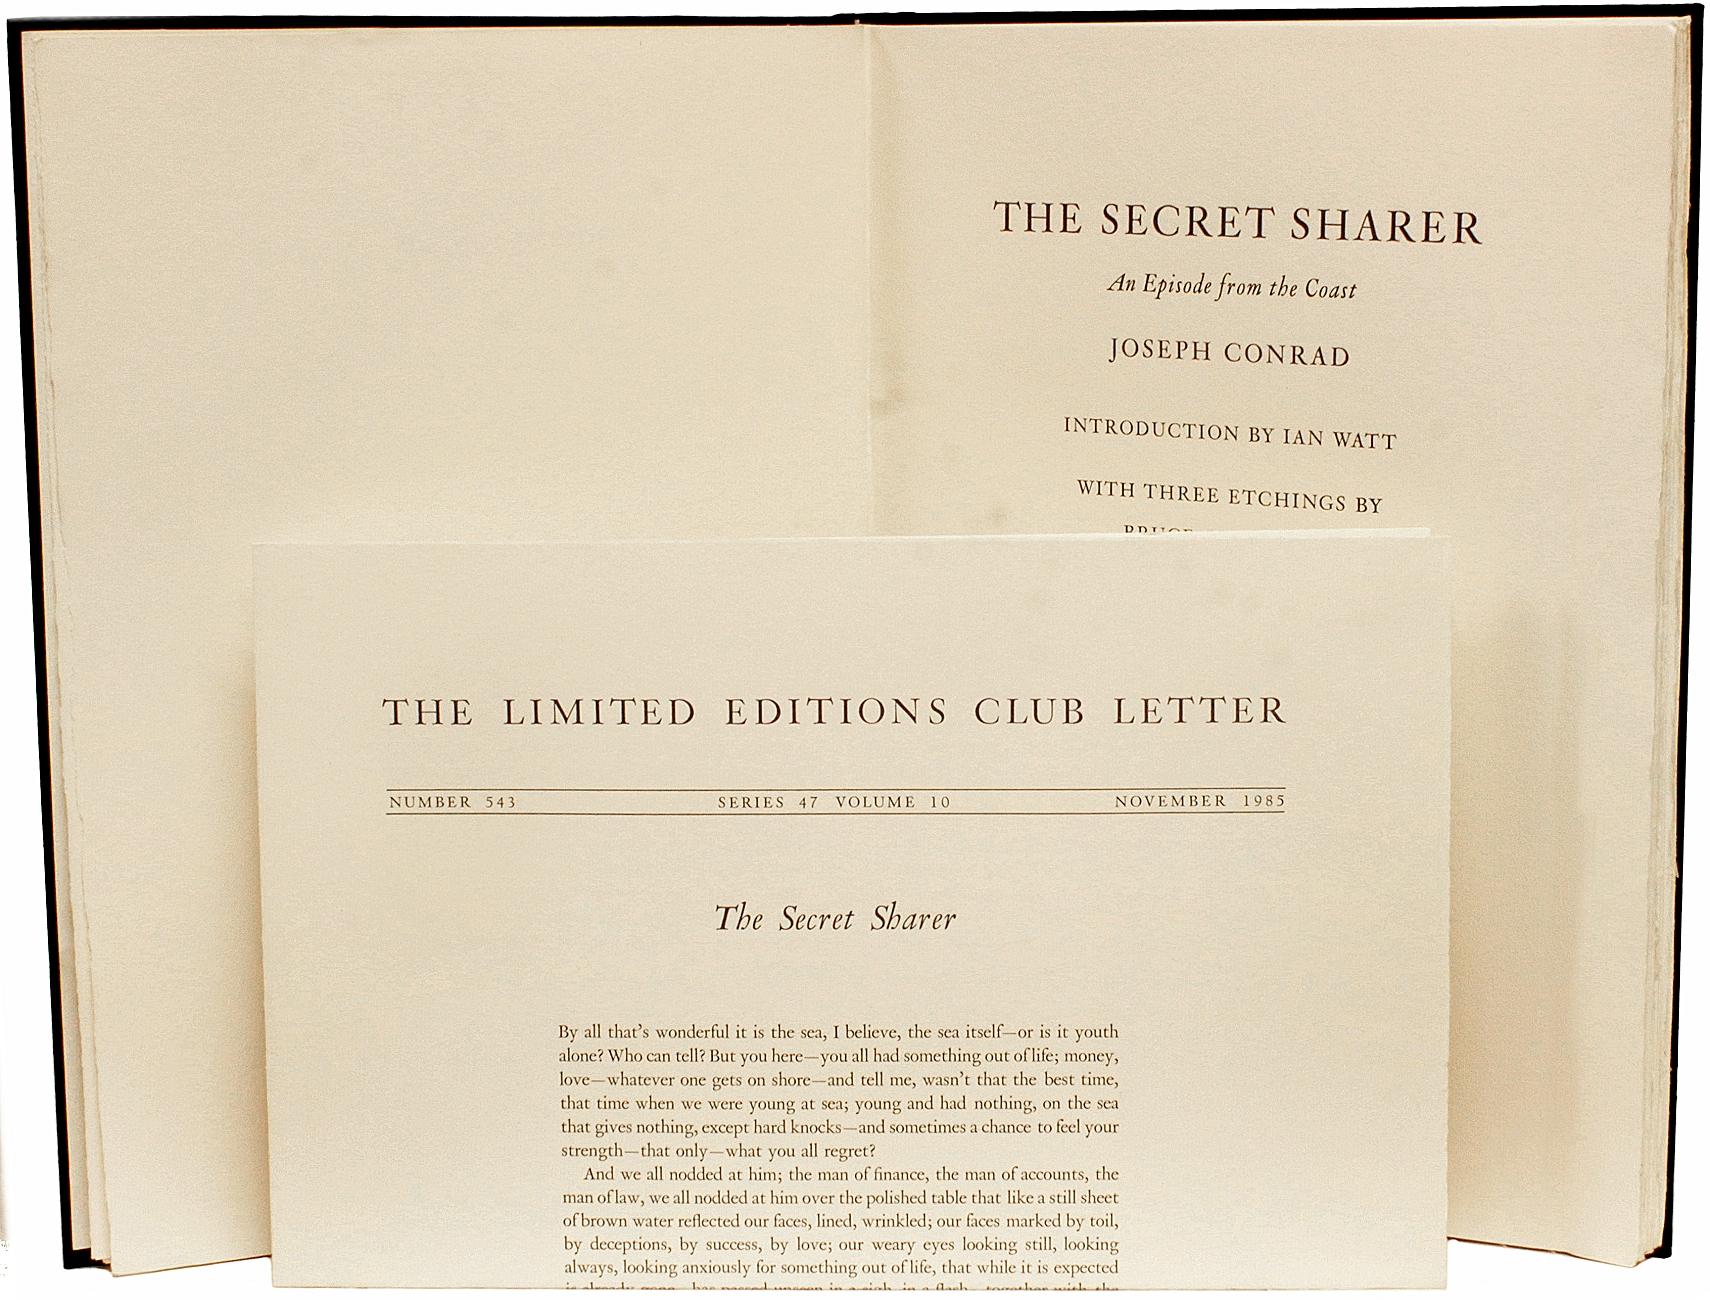 AUTHOR: CONRAD, Joseph. 

TITLE: The Secret Sharer. An Episode From The Coast.

PUBLISHER: NY: The Limited Editions Club, 1985.

DESCRIPTION: LIMITED SIGNED EDITION. 1 vol., limited to 1500 numbered copies signed by the illustrator Bruce